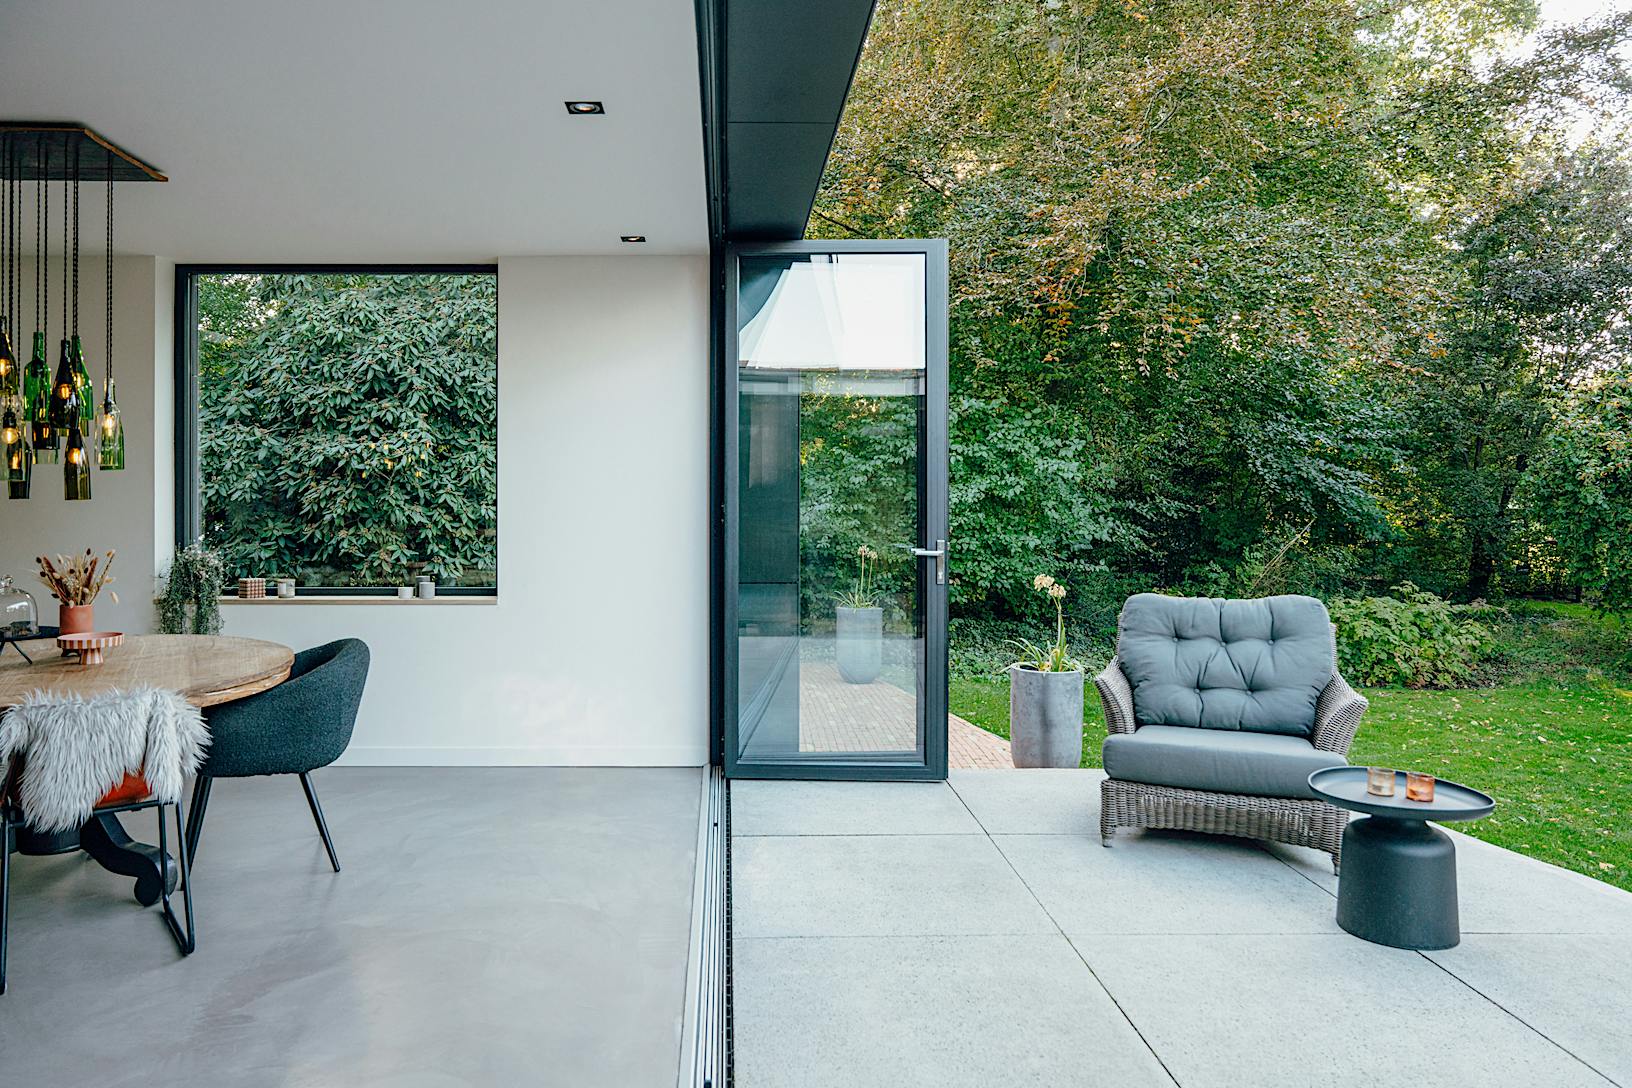 A modern patio with a black chair and table - large opening glass walls